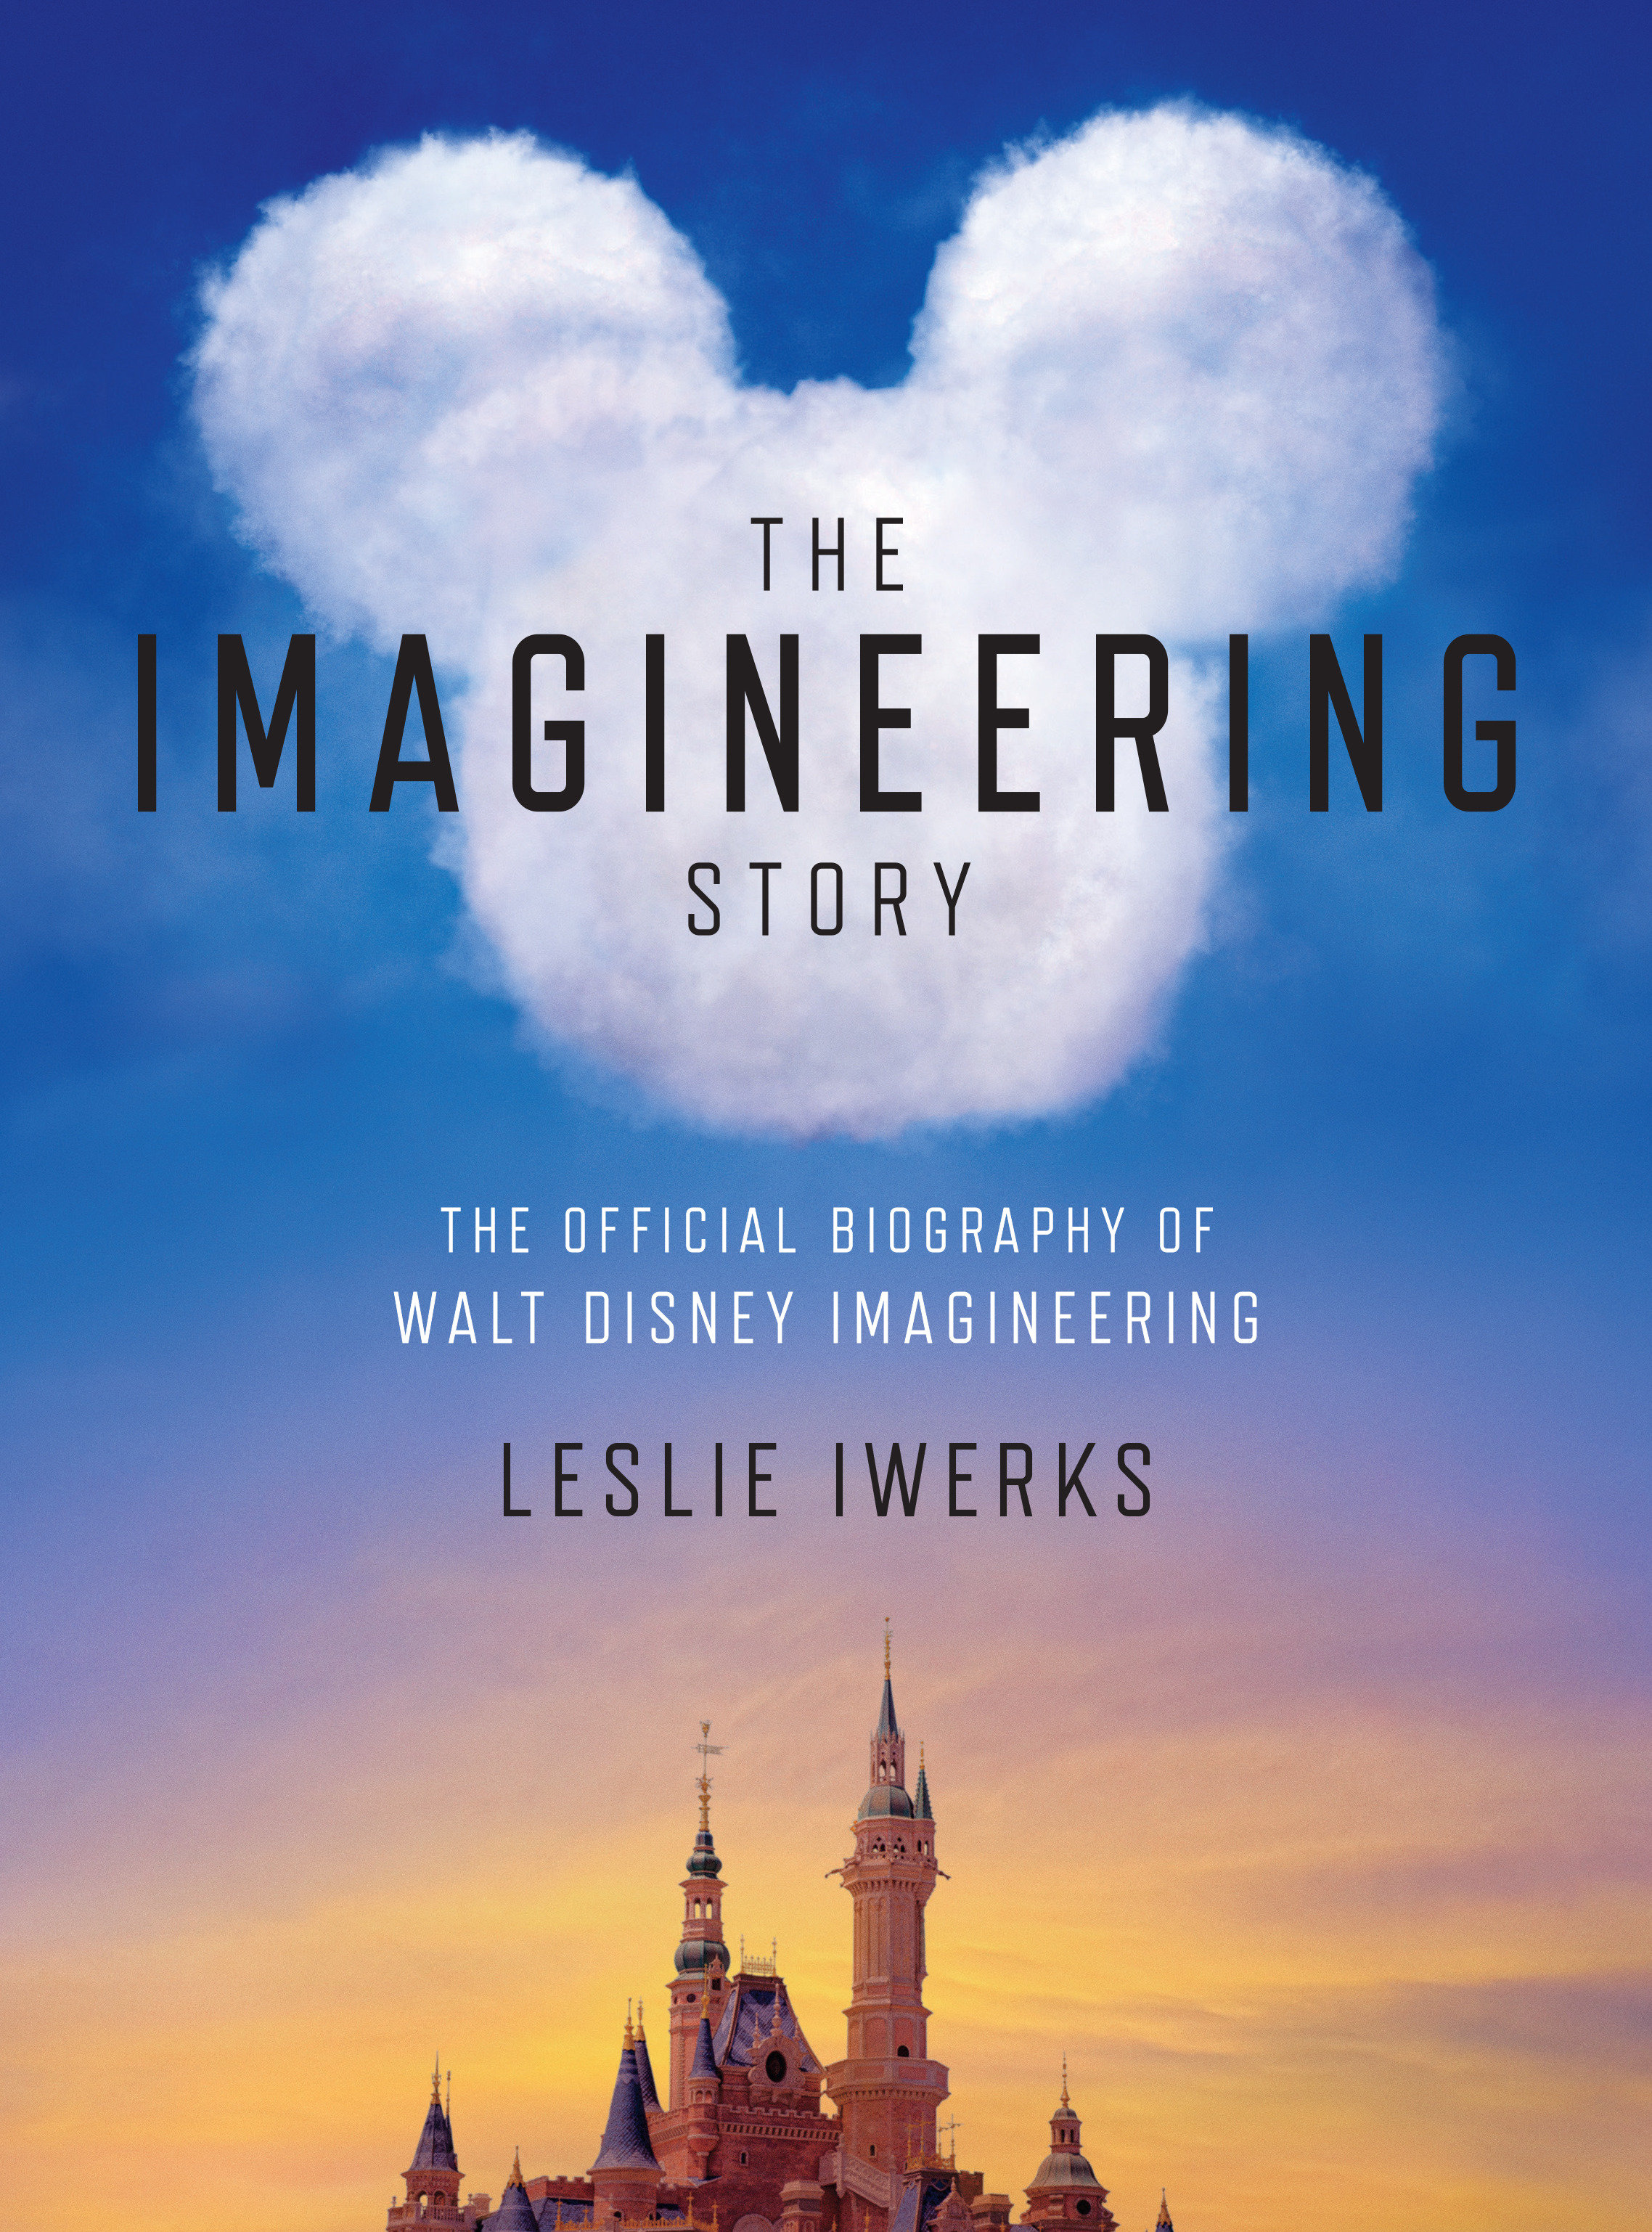 The Imagineering Story (Hardcover Book)